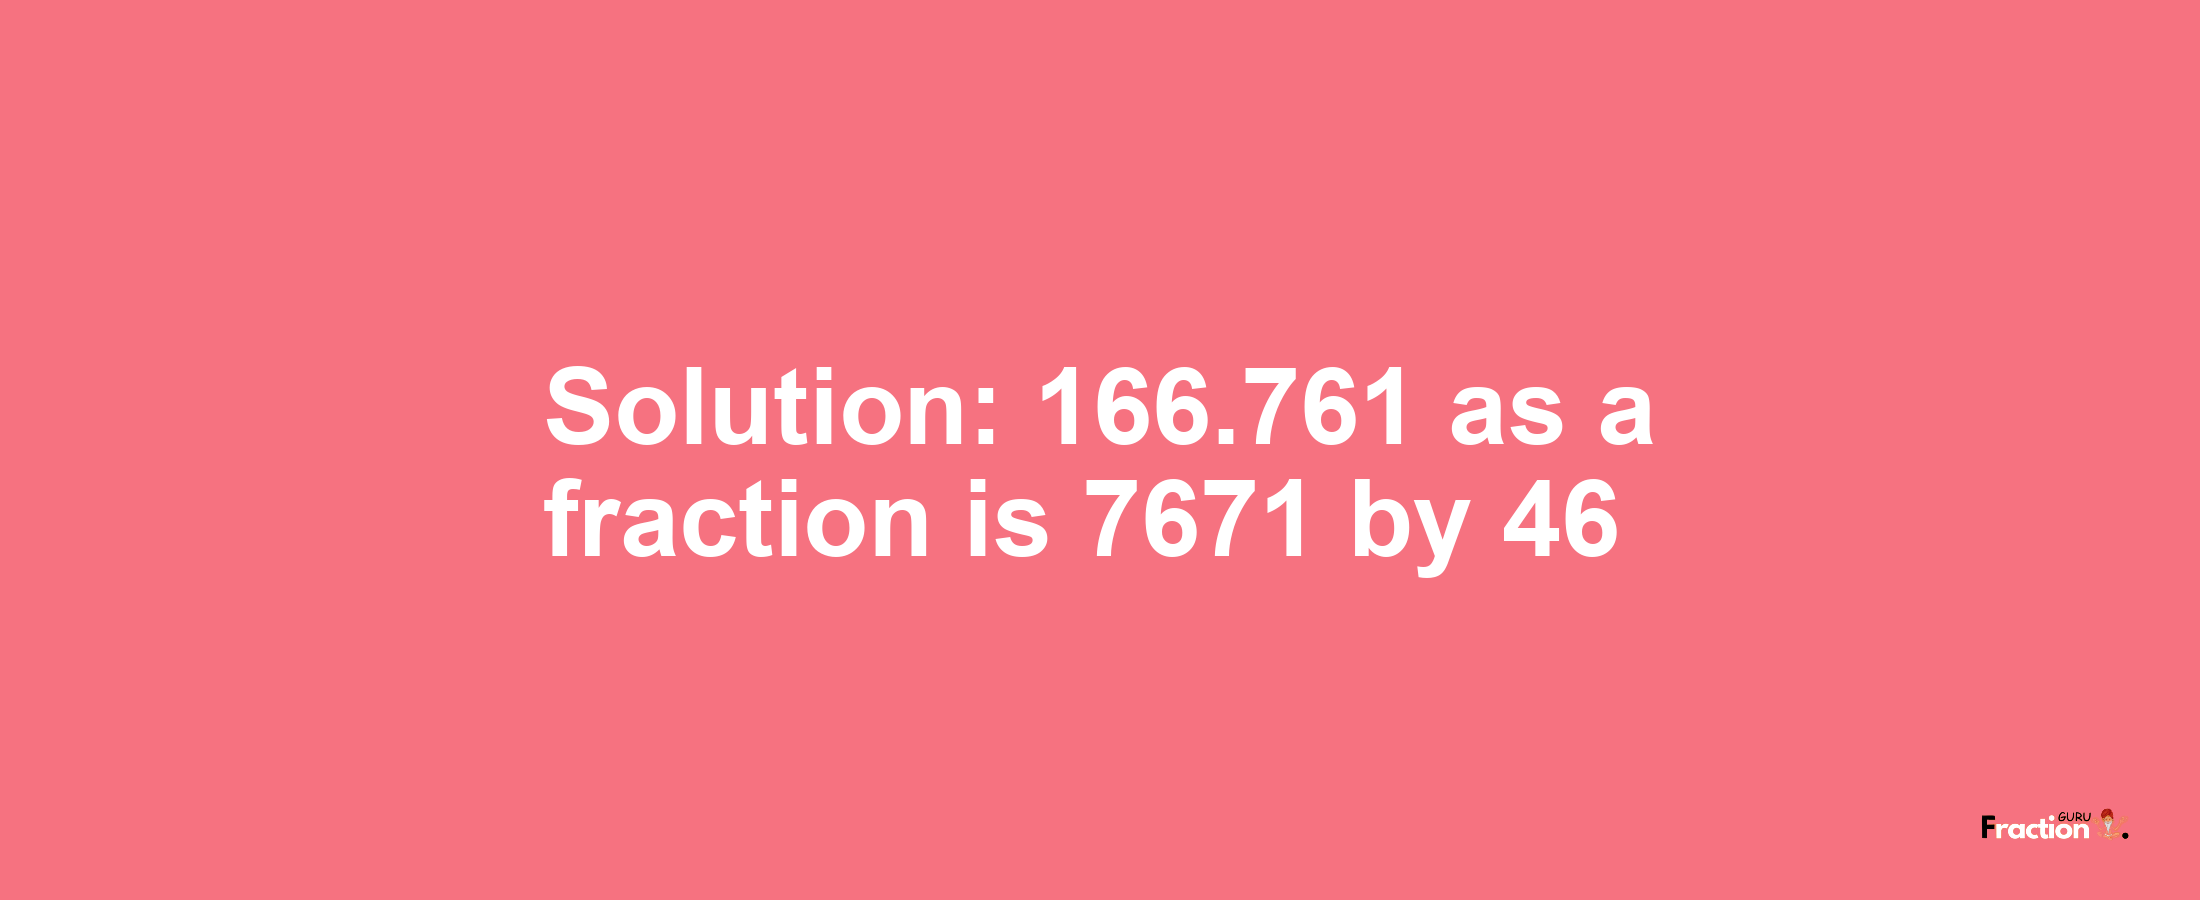 Solution:166.761 as a fraction is 7671/46